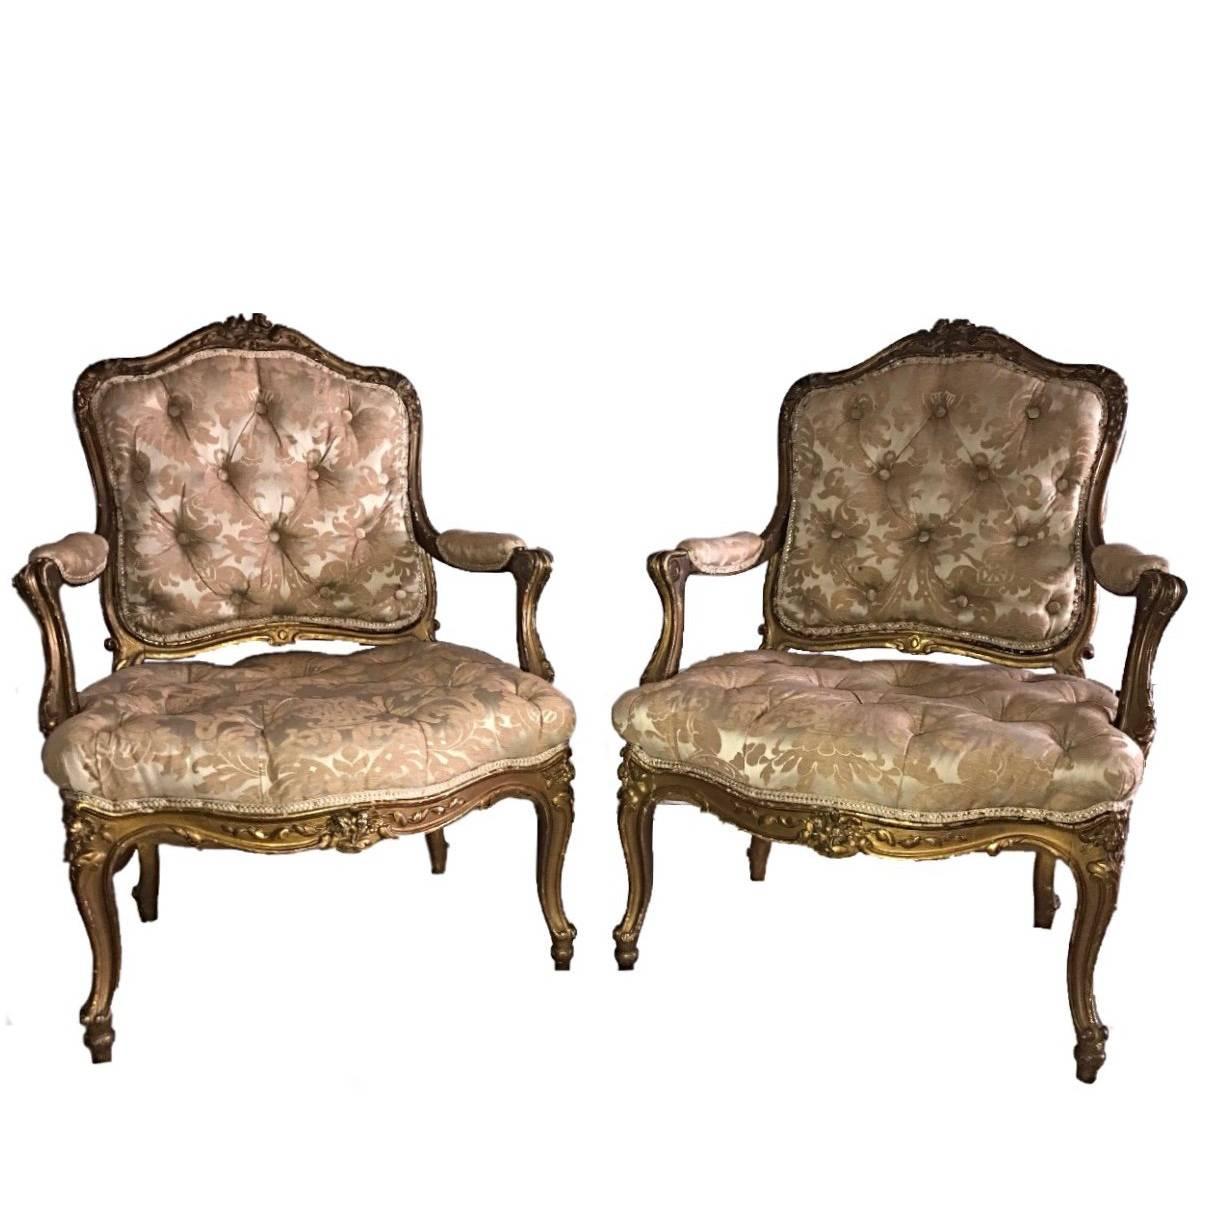 Pair of 19th Century French Giltwood Fauteuil Chairs For Sale